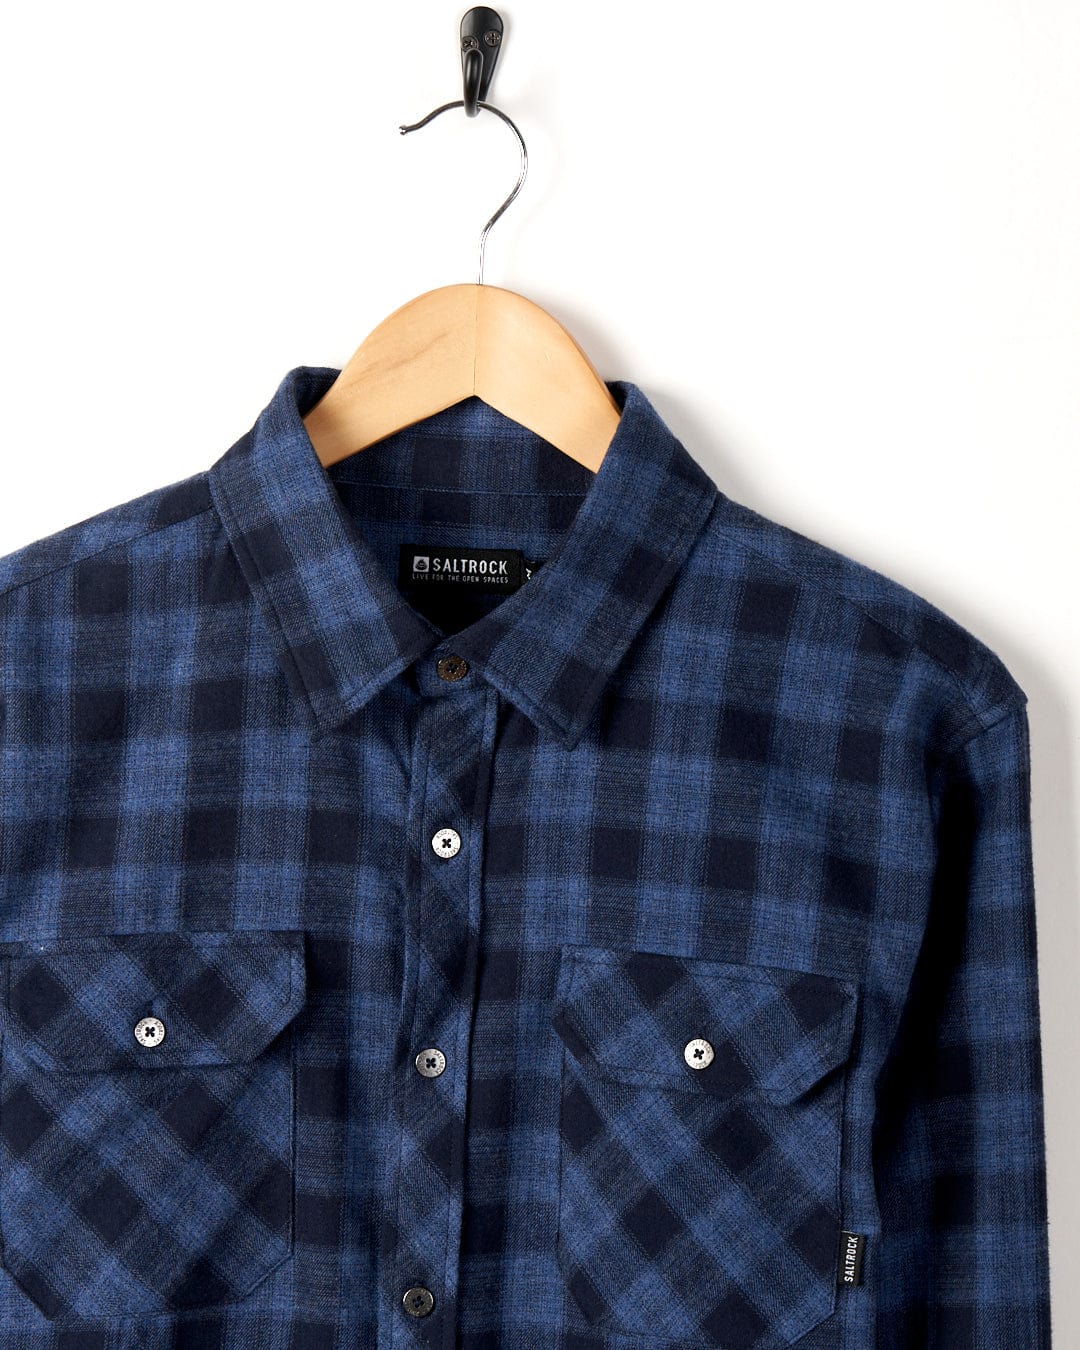 Farrow - Mens Long Sleeve Shirt - Blue by Saltrock on a wooden hanger against a white background.